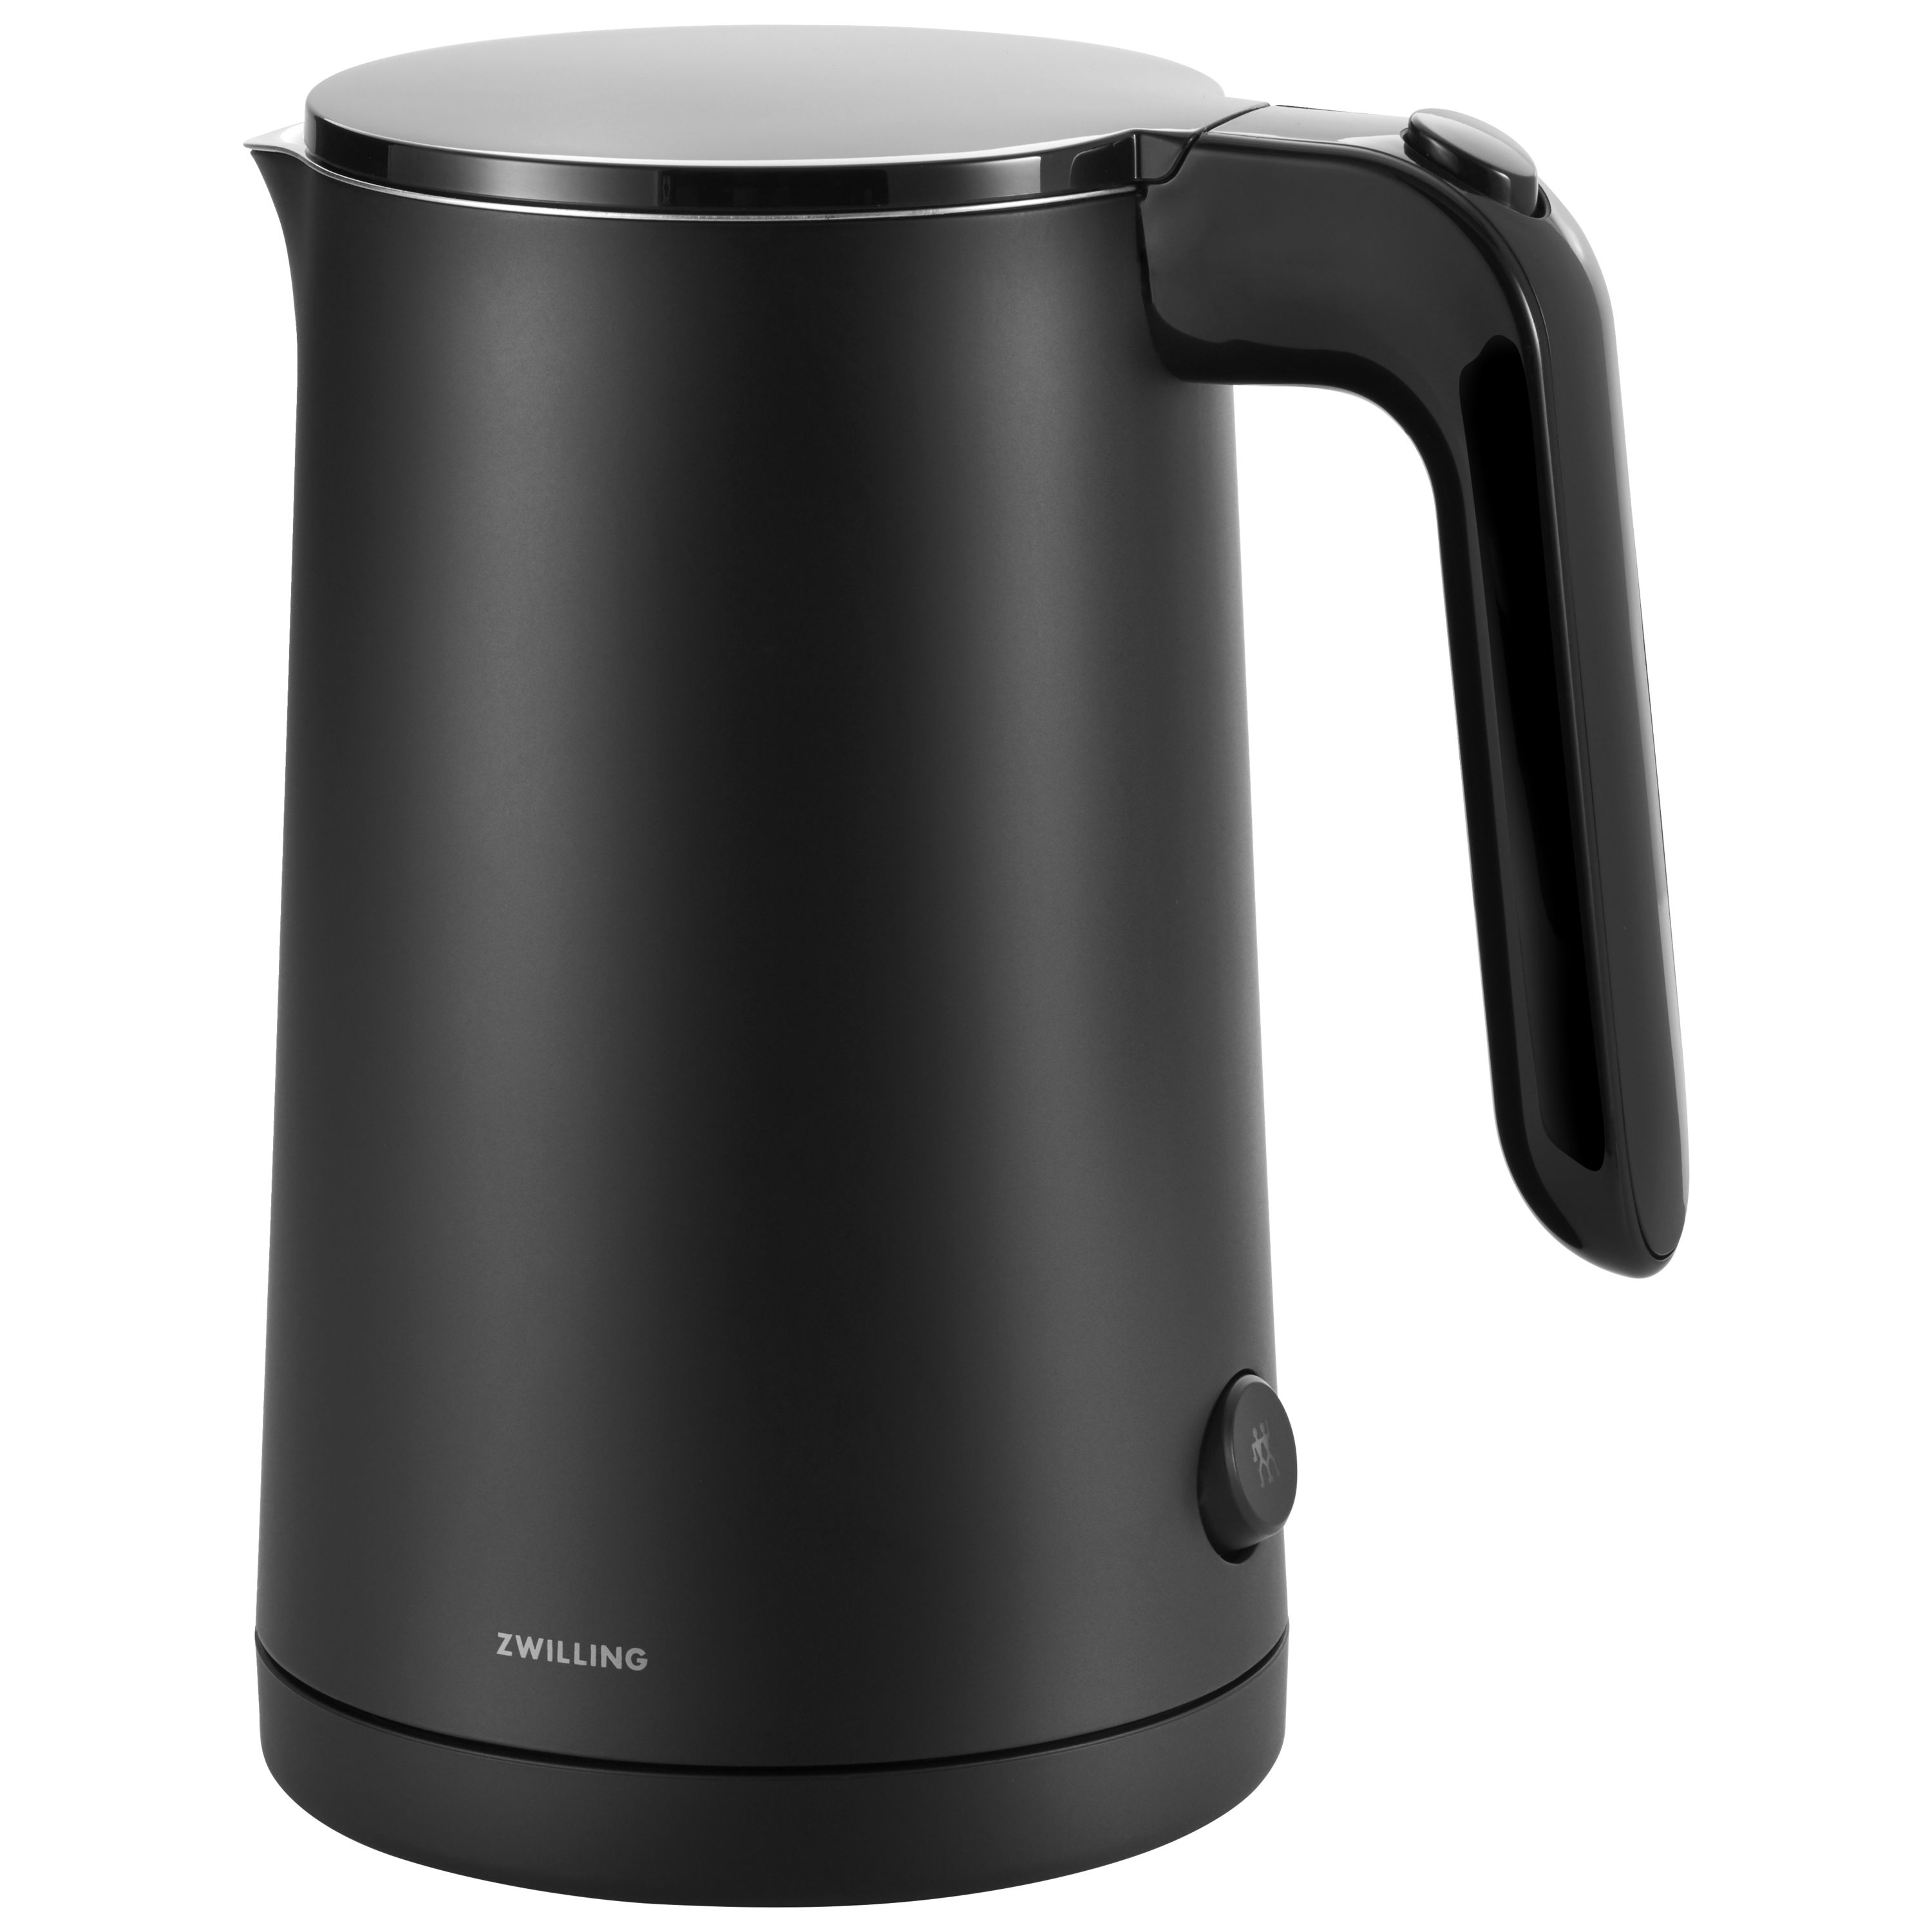 Electric Kettle - Auto-Off Rapid Boil Water Heater by Classic Cuisine - Black